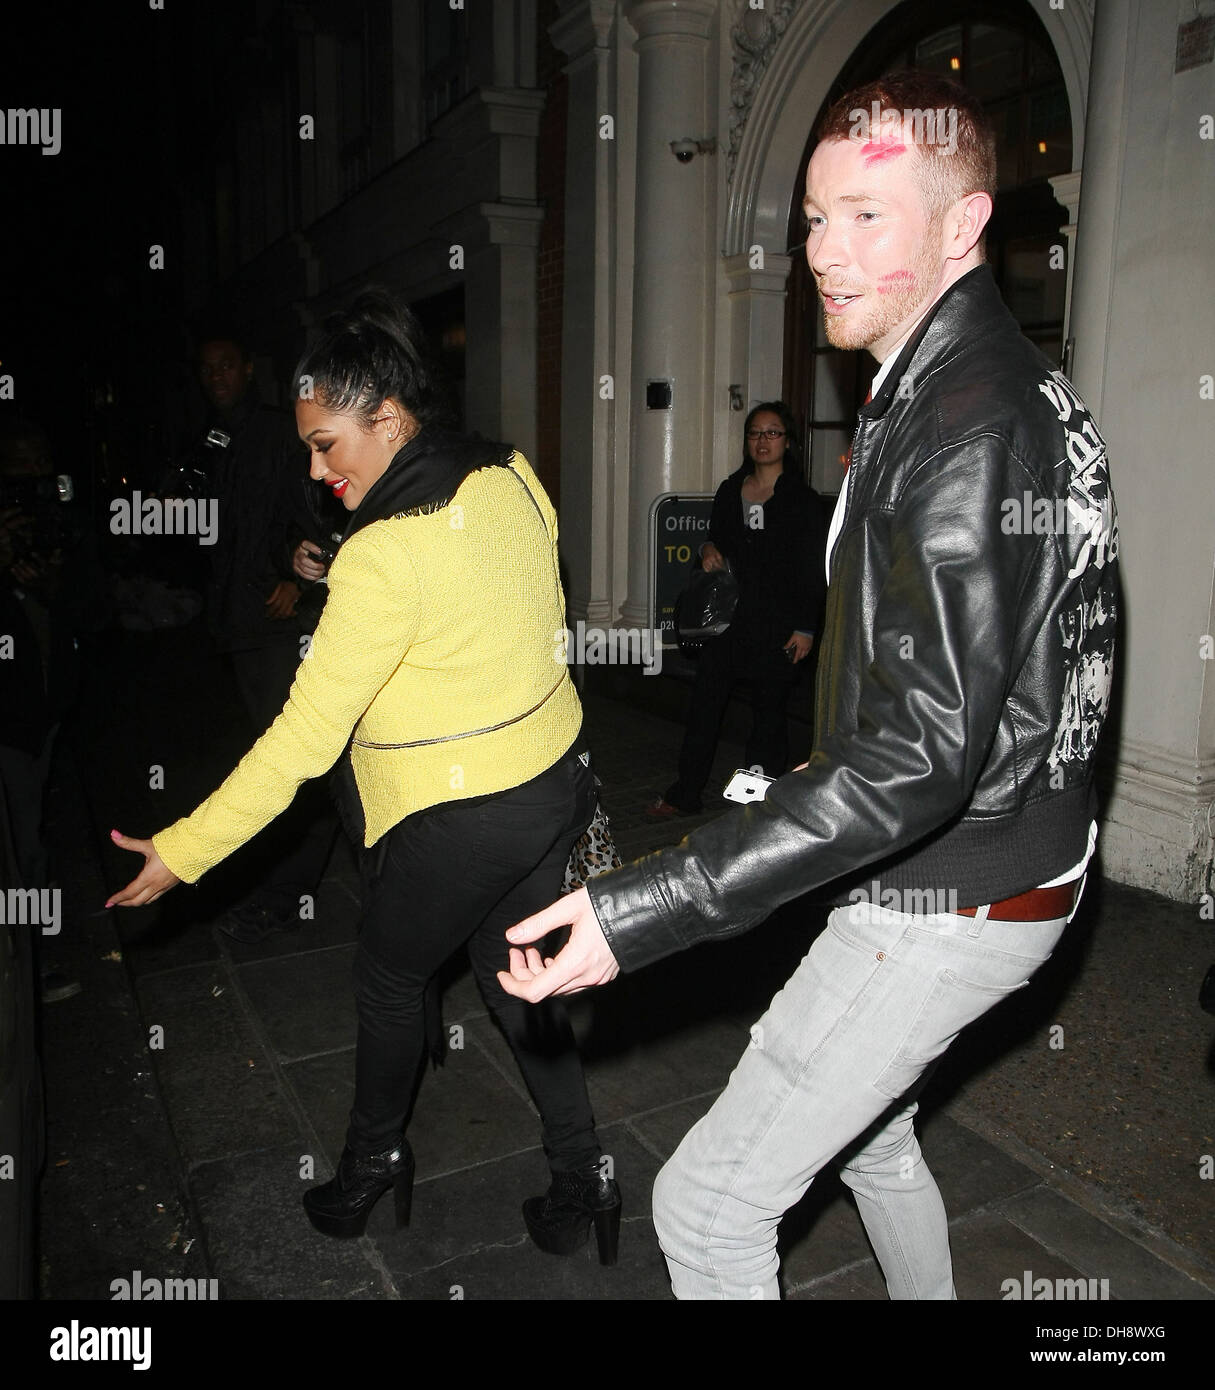 Vanessa White leaves bu Berkeley with friend Sean lan who appears to ...